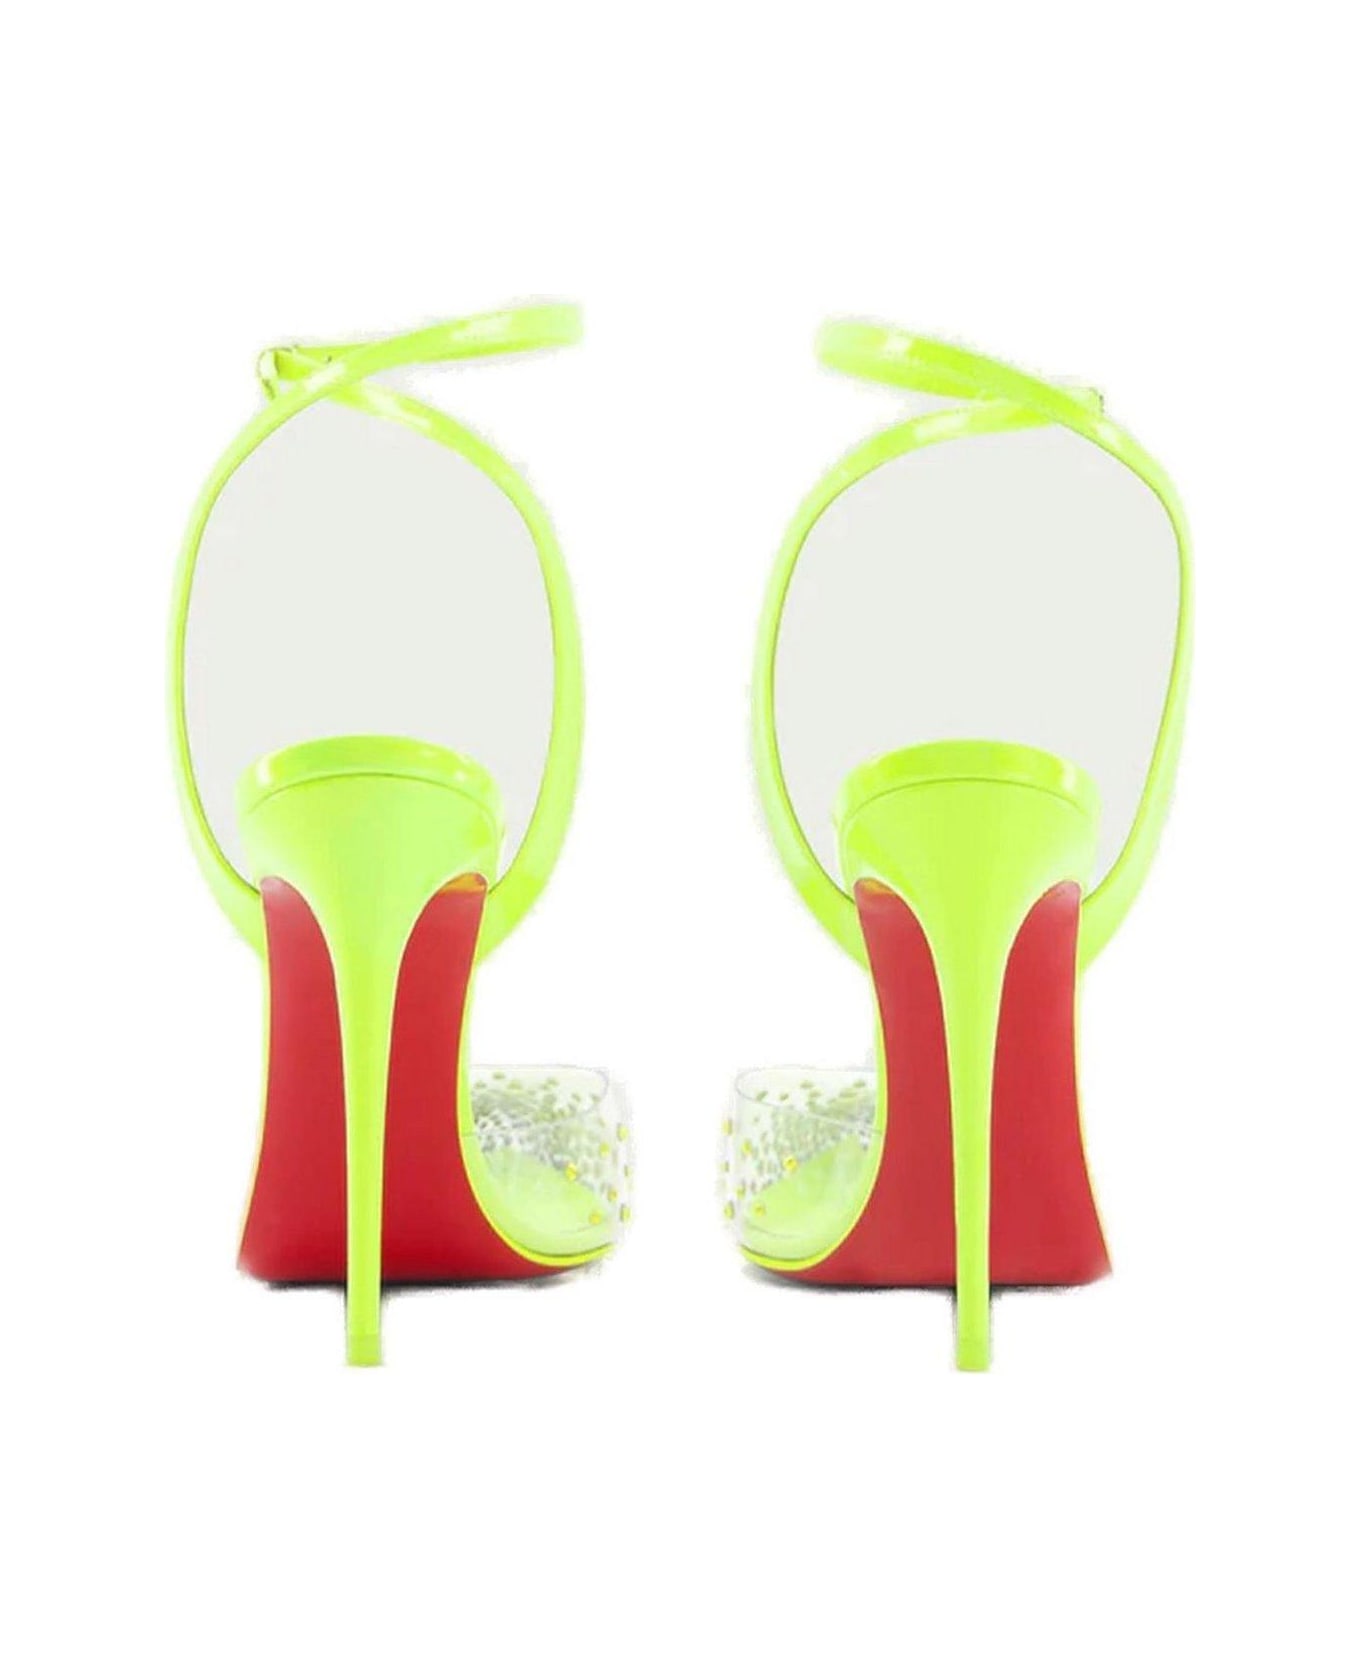 Christian Louboutin Spikaqueen Pointed Toe Pumps - Yellow ハイヒール